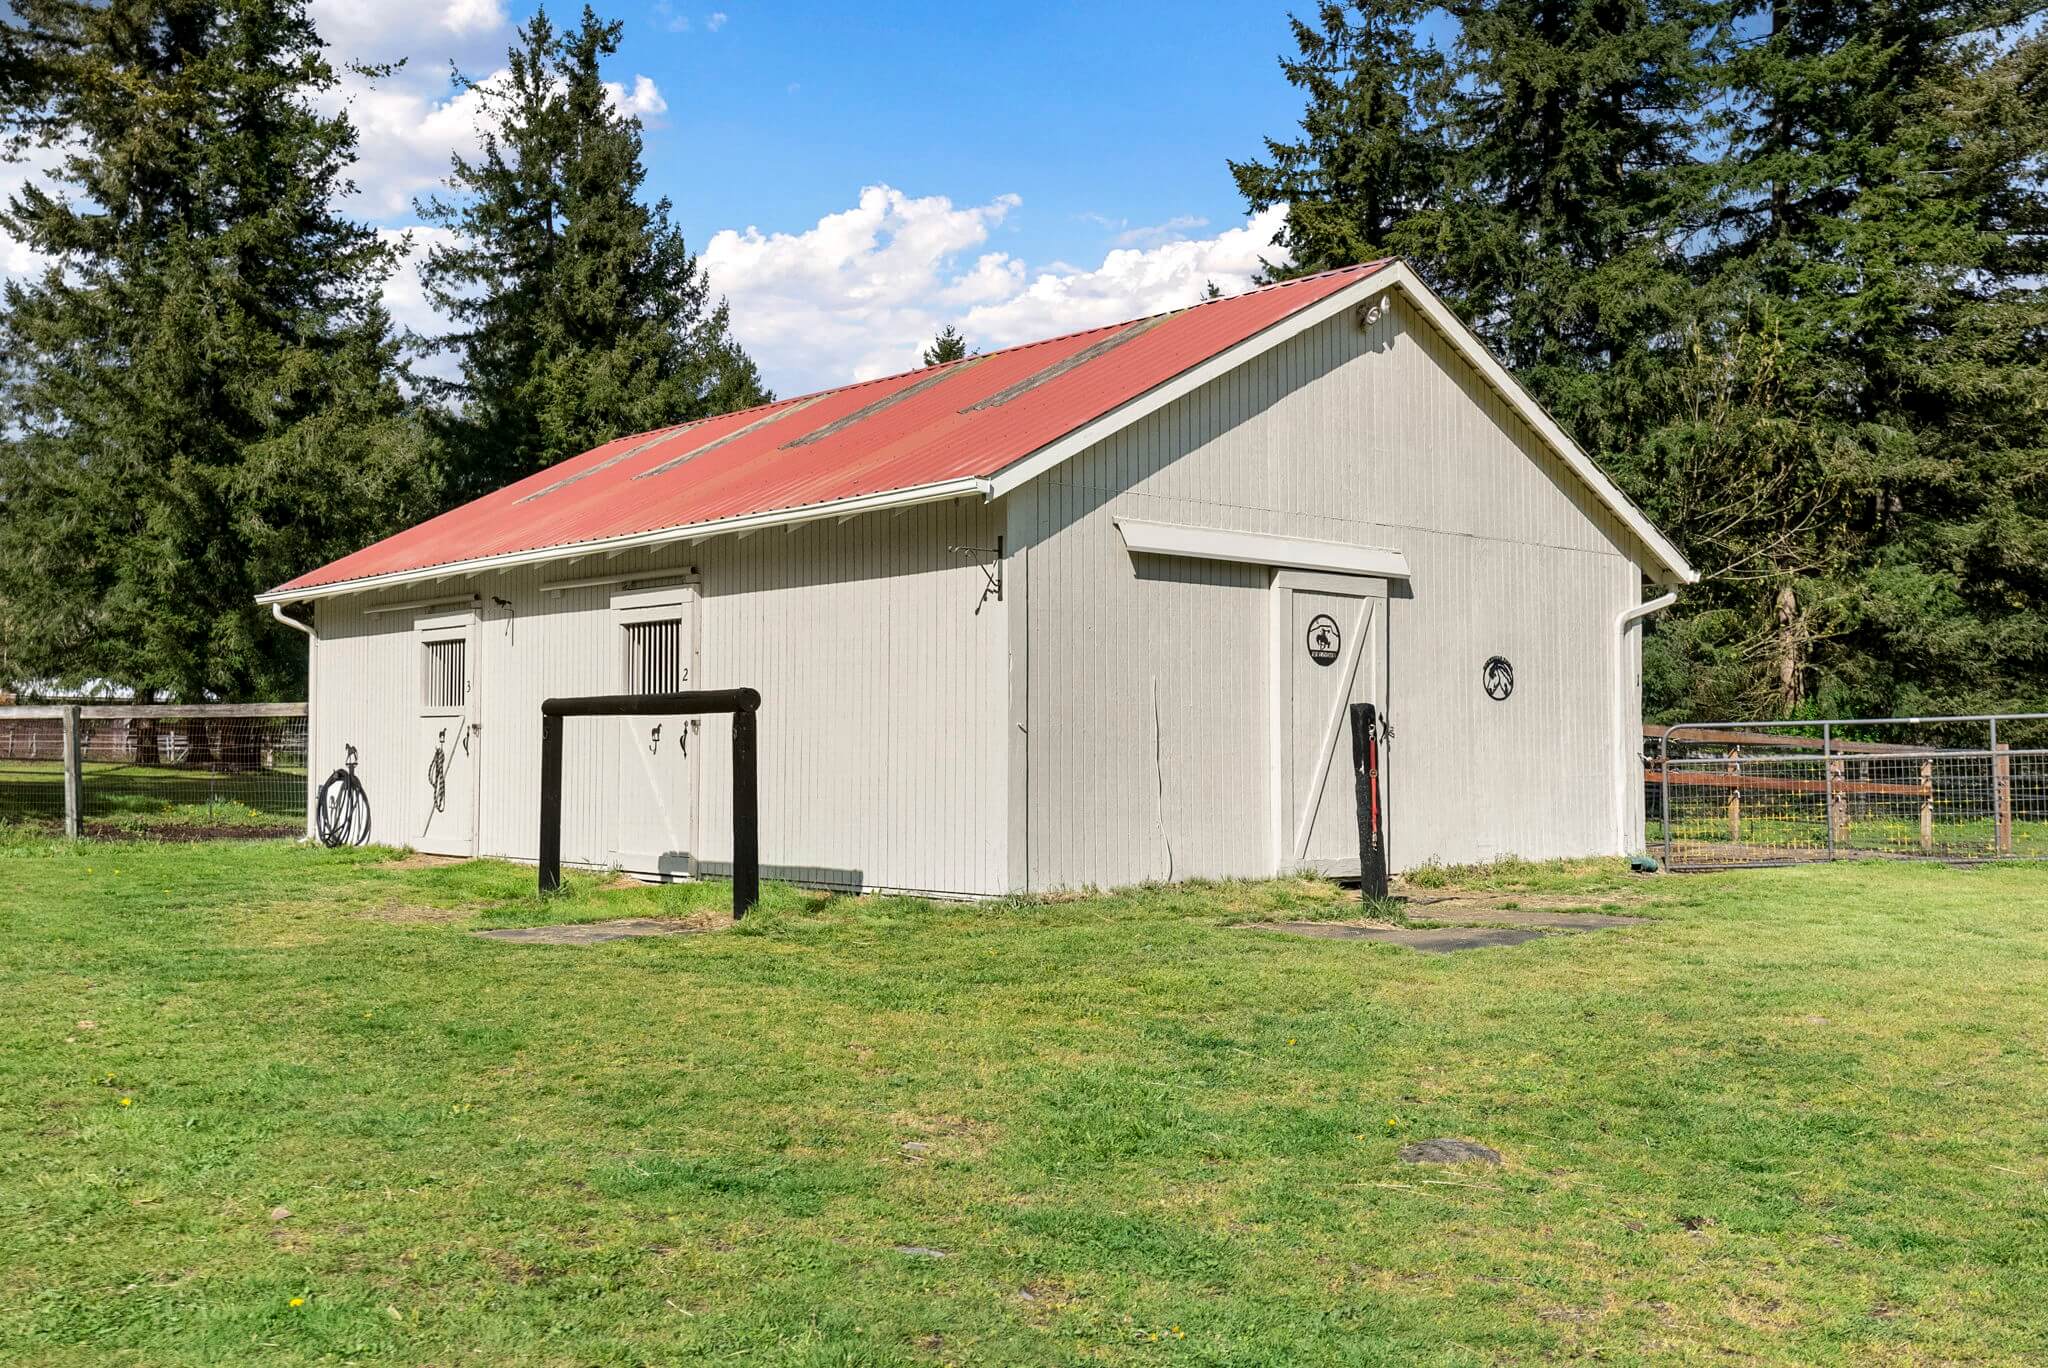 One of three smaller barns with a feed/tack room and three stalls with separate paddocks